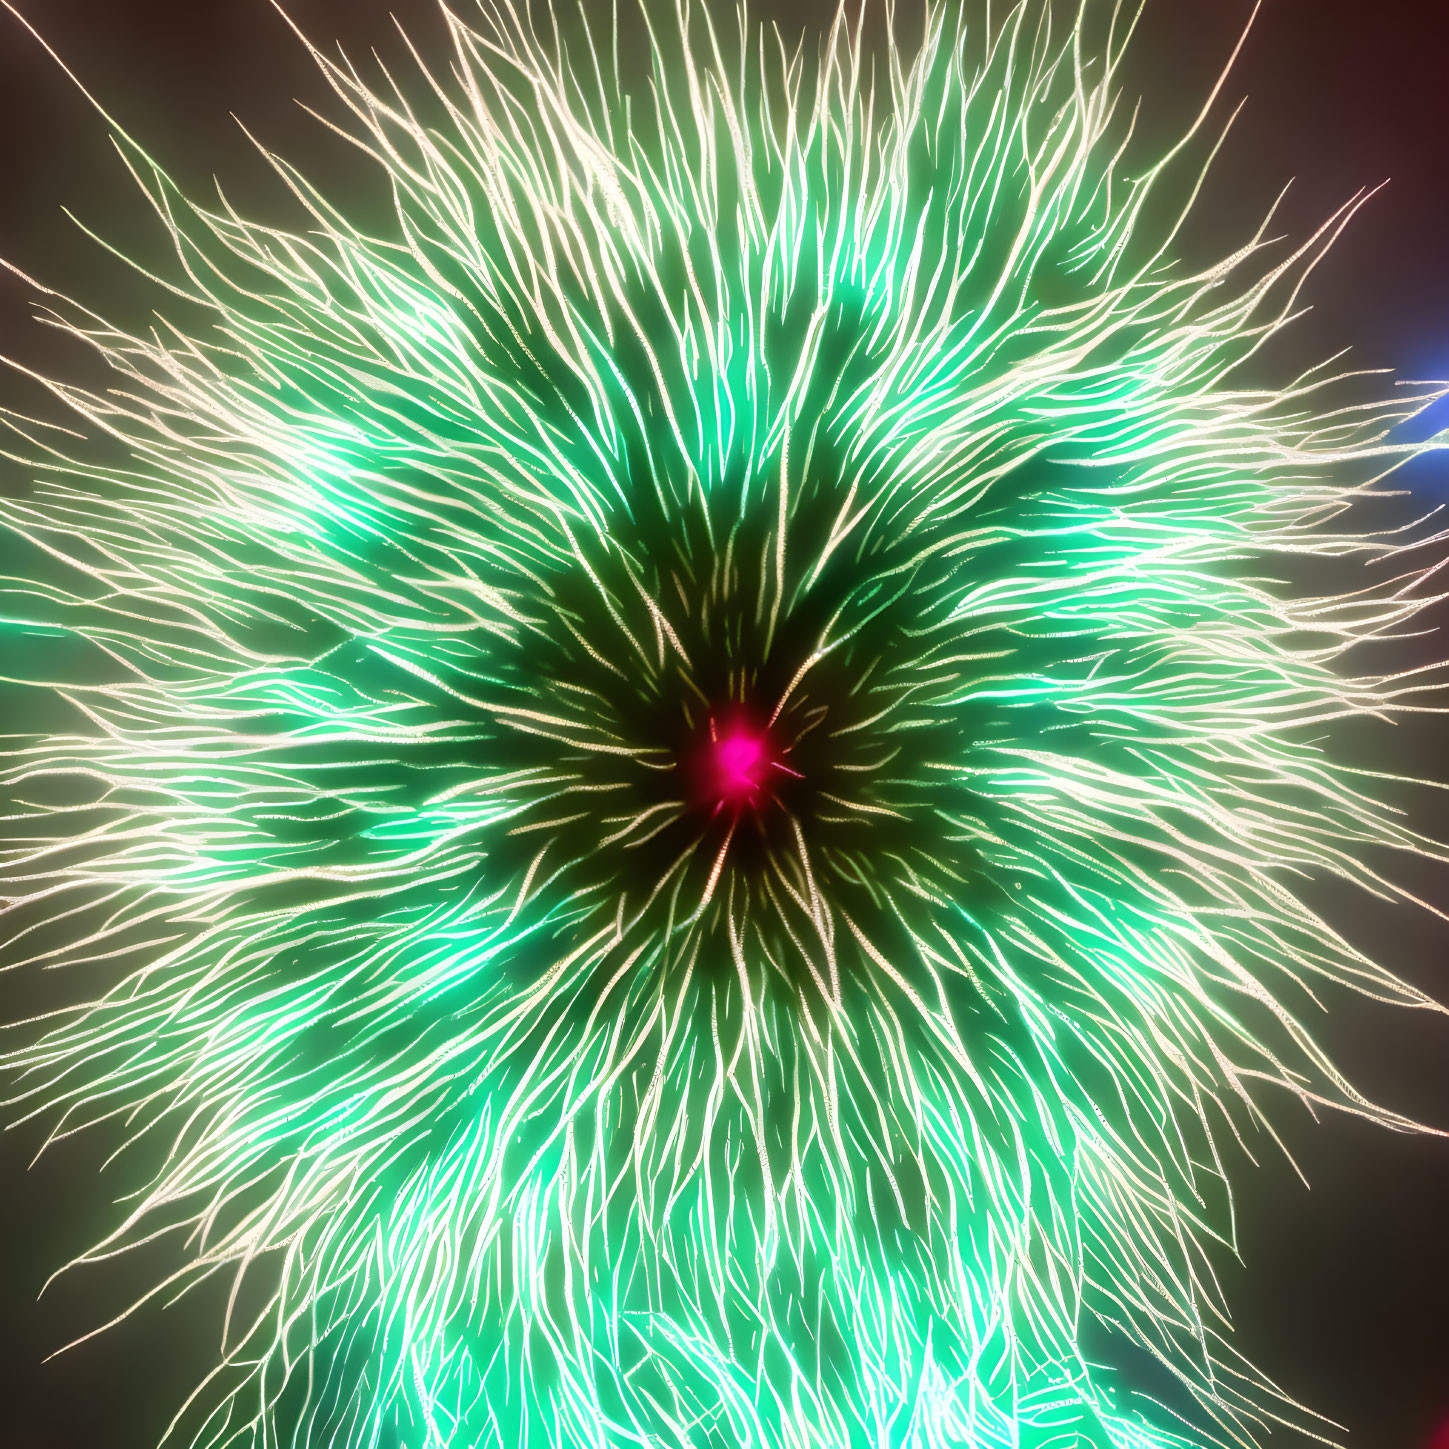 Colorful green and pink firework explosion in dark sky, resembling blooming dandelion